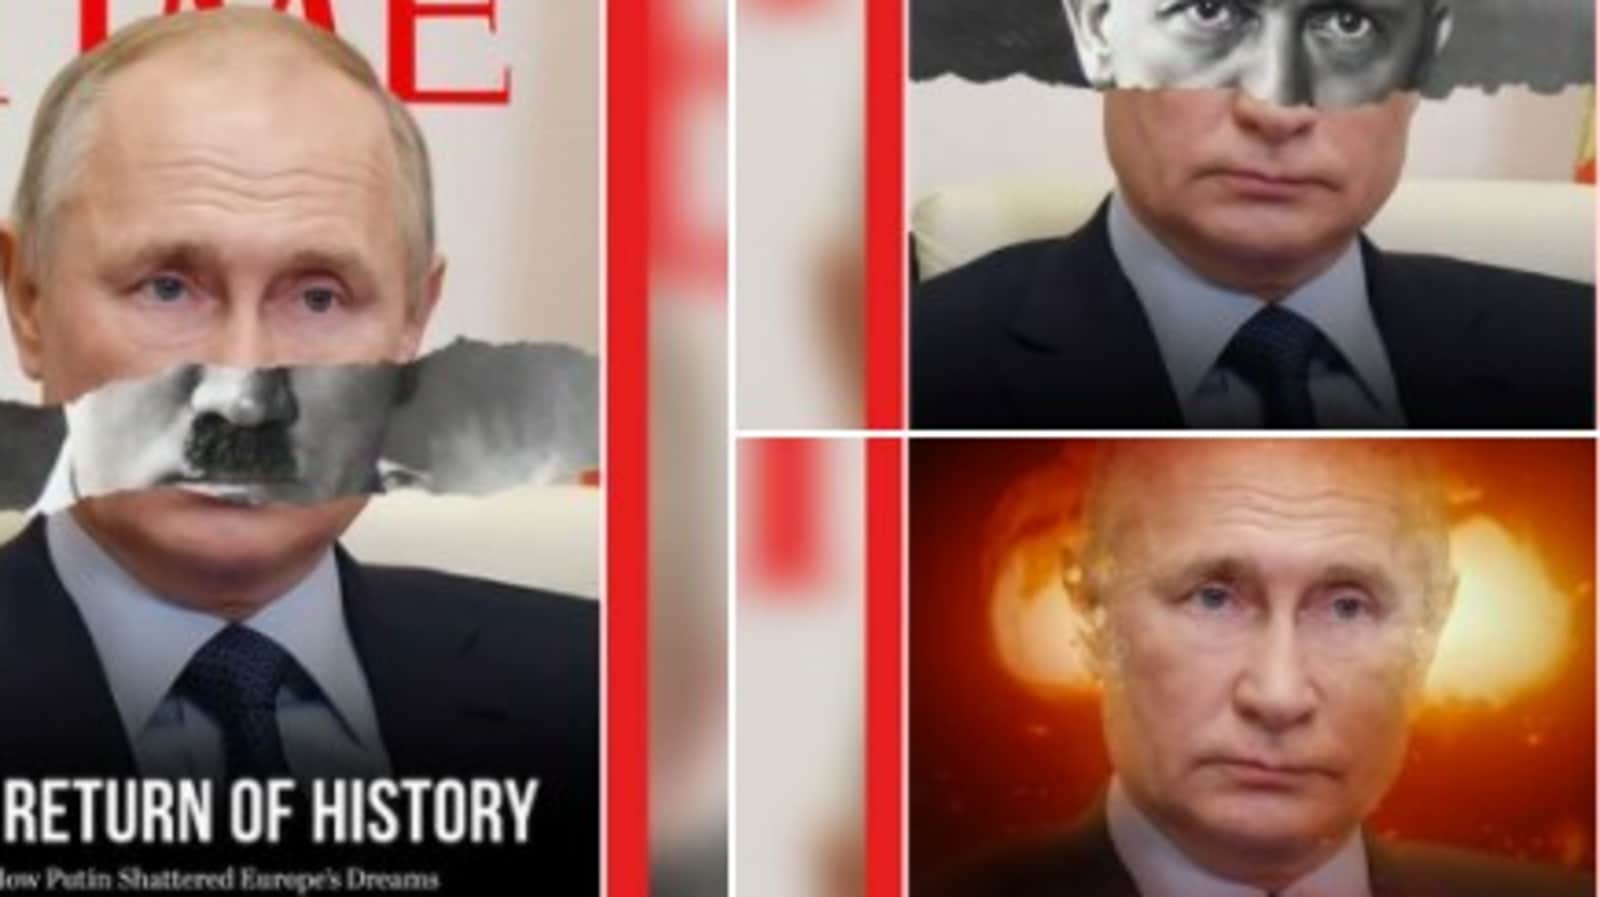 The Time Magazine cover that wasn't: Putin + Hitler picture amid Ukraine  war | World News - Hindustan Times